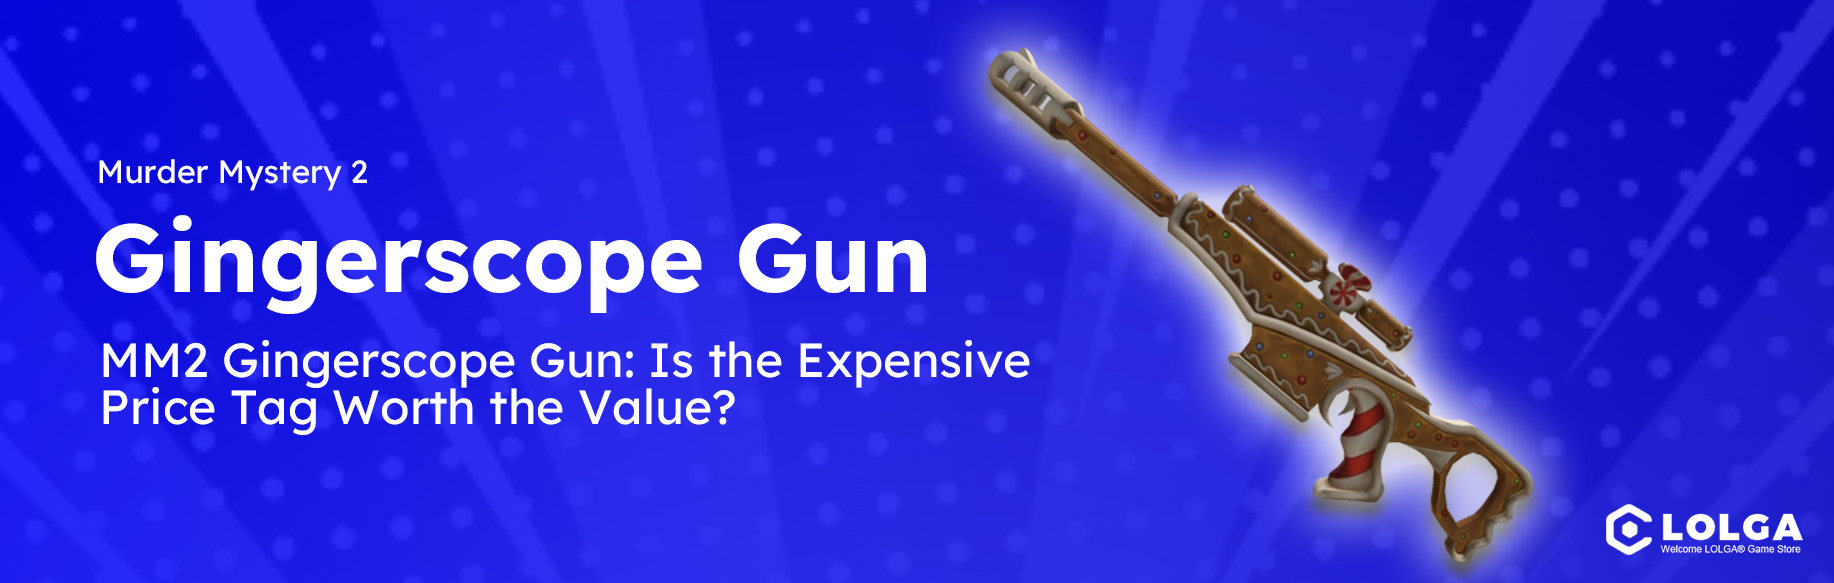 MM2 Gingerscope Gun: Is the Expensive Price Tag Worth the Value?